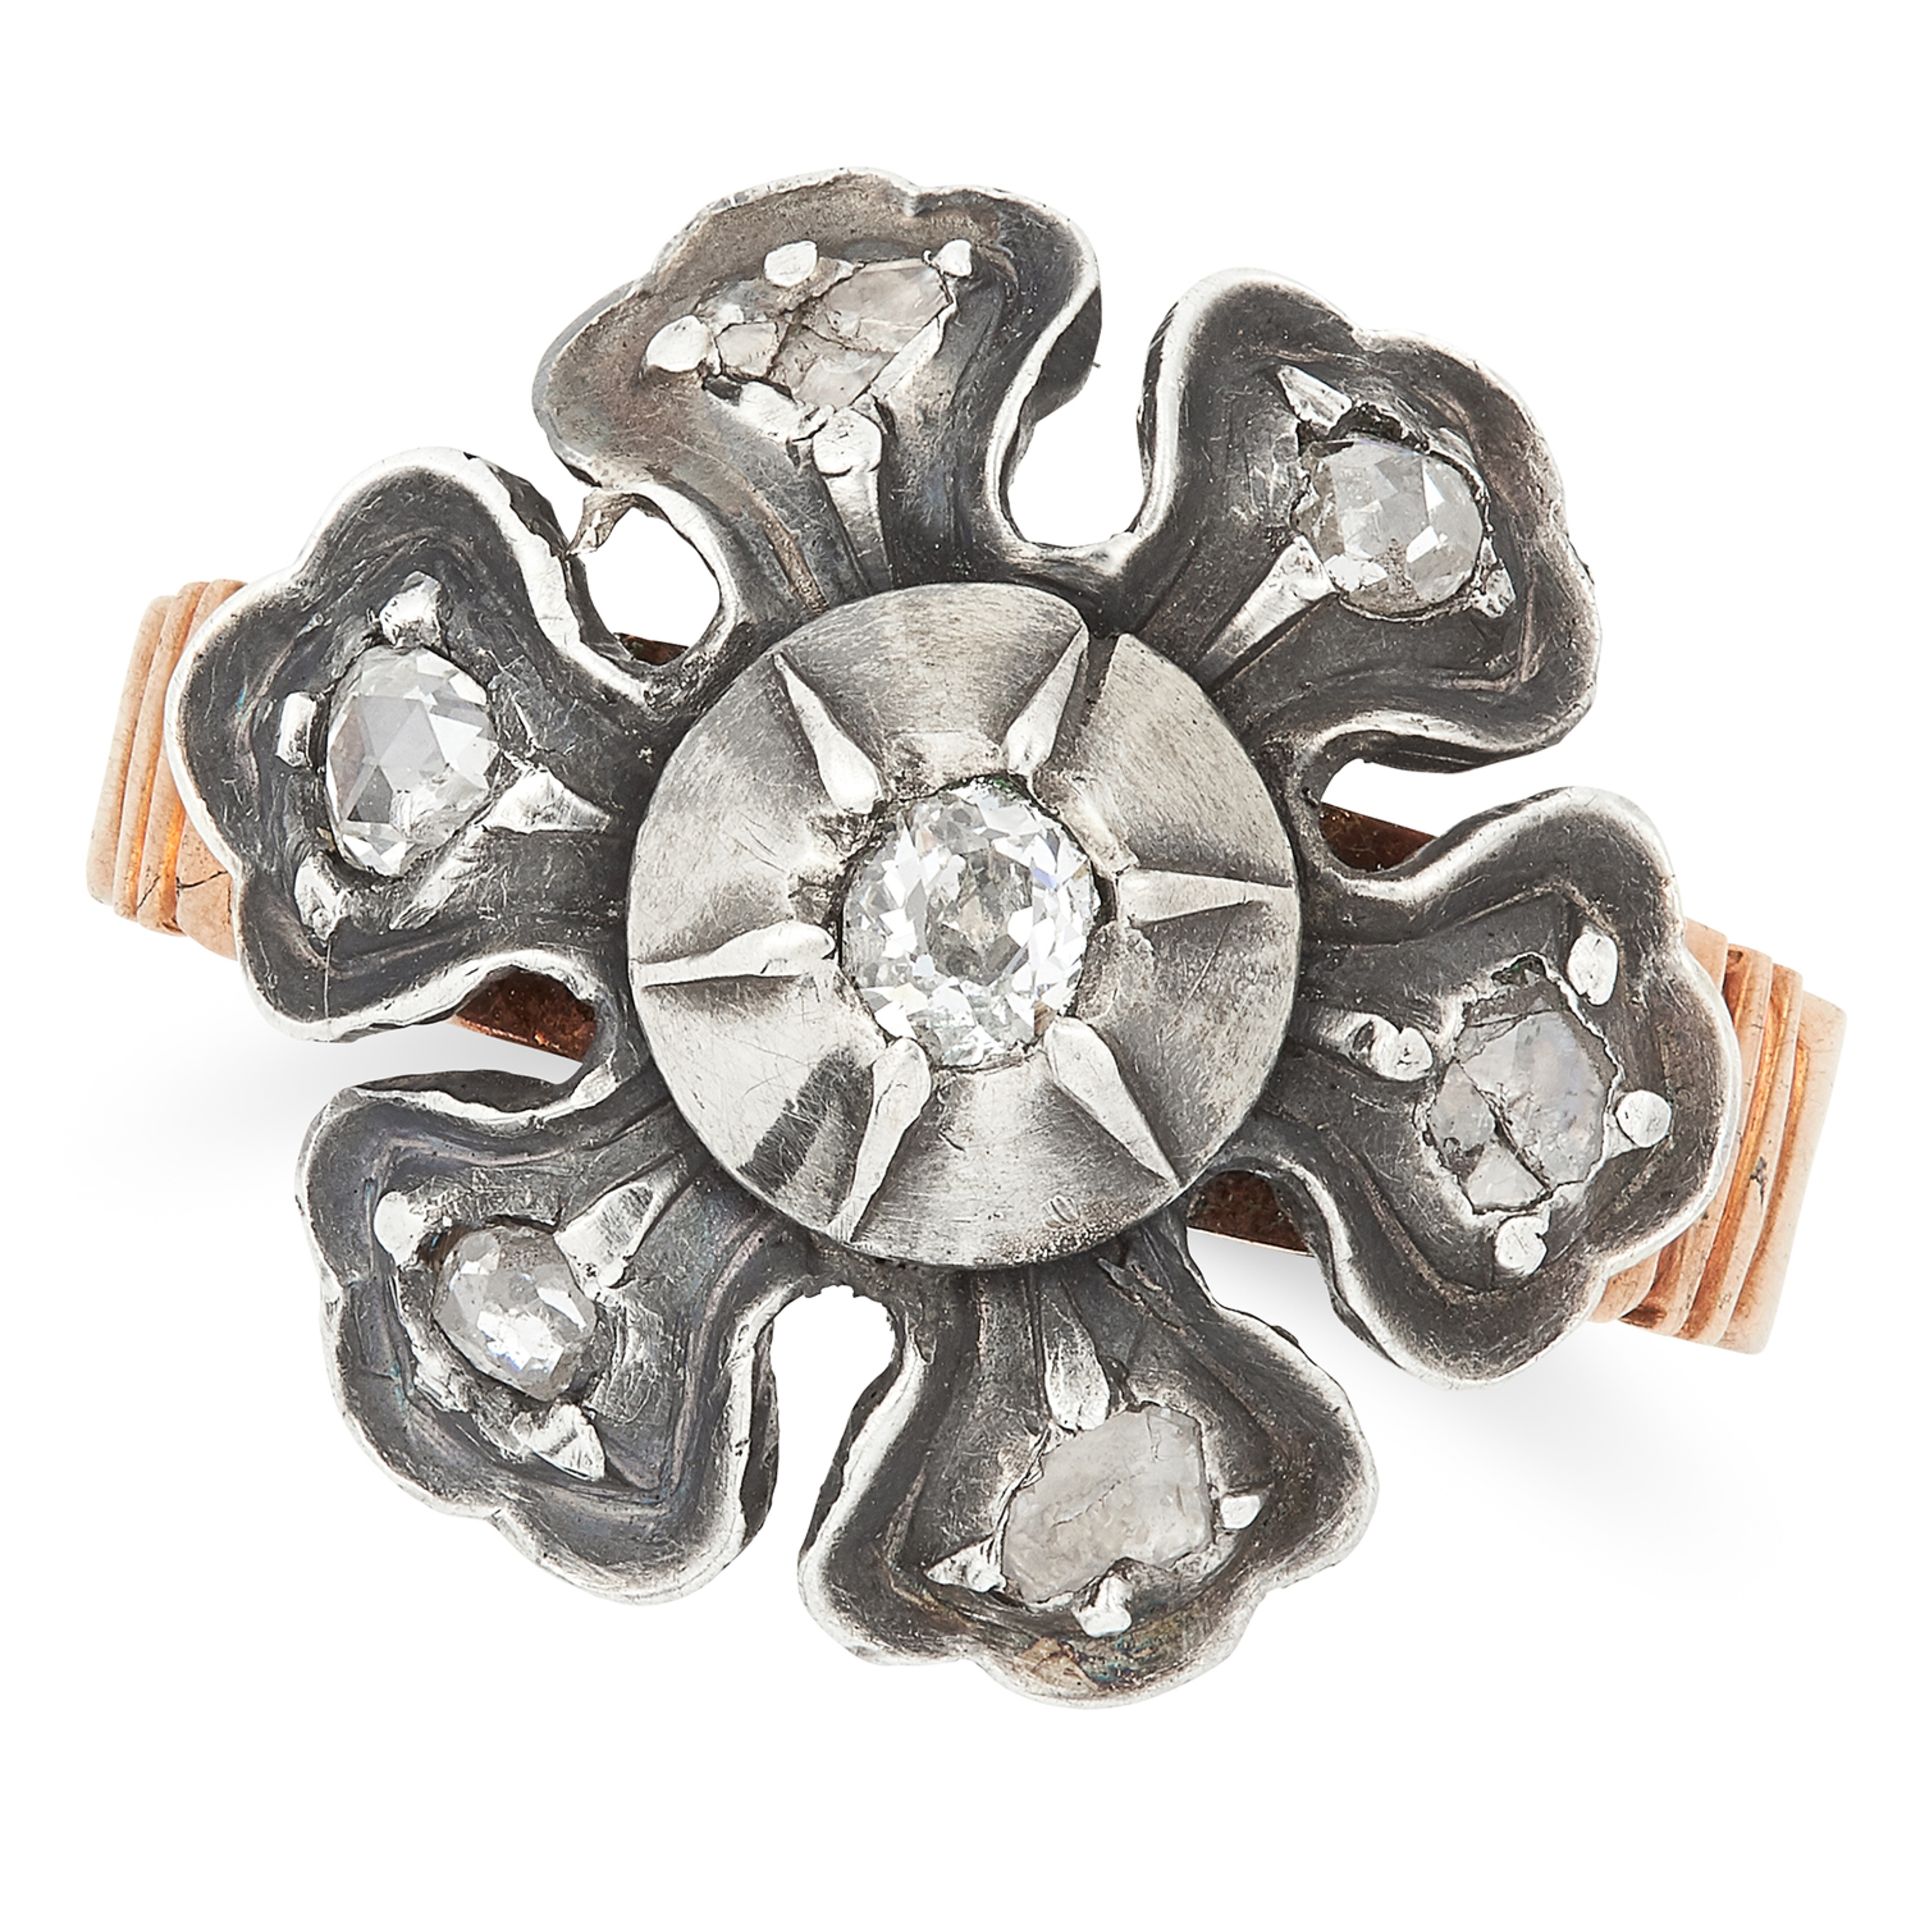 DIAMOND FLOWER RING set with old and rose cut diamonds, size P / 7.5, 4.8g.